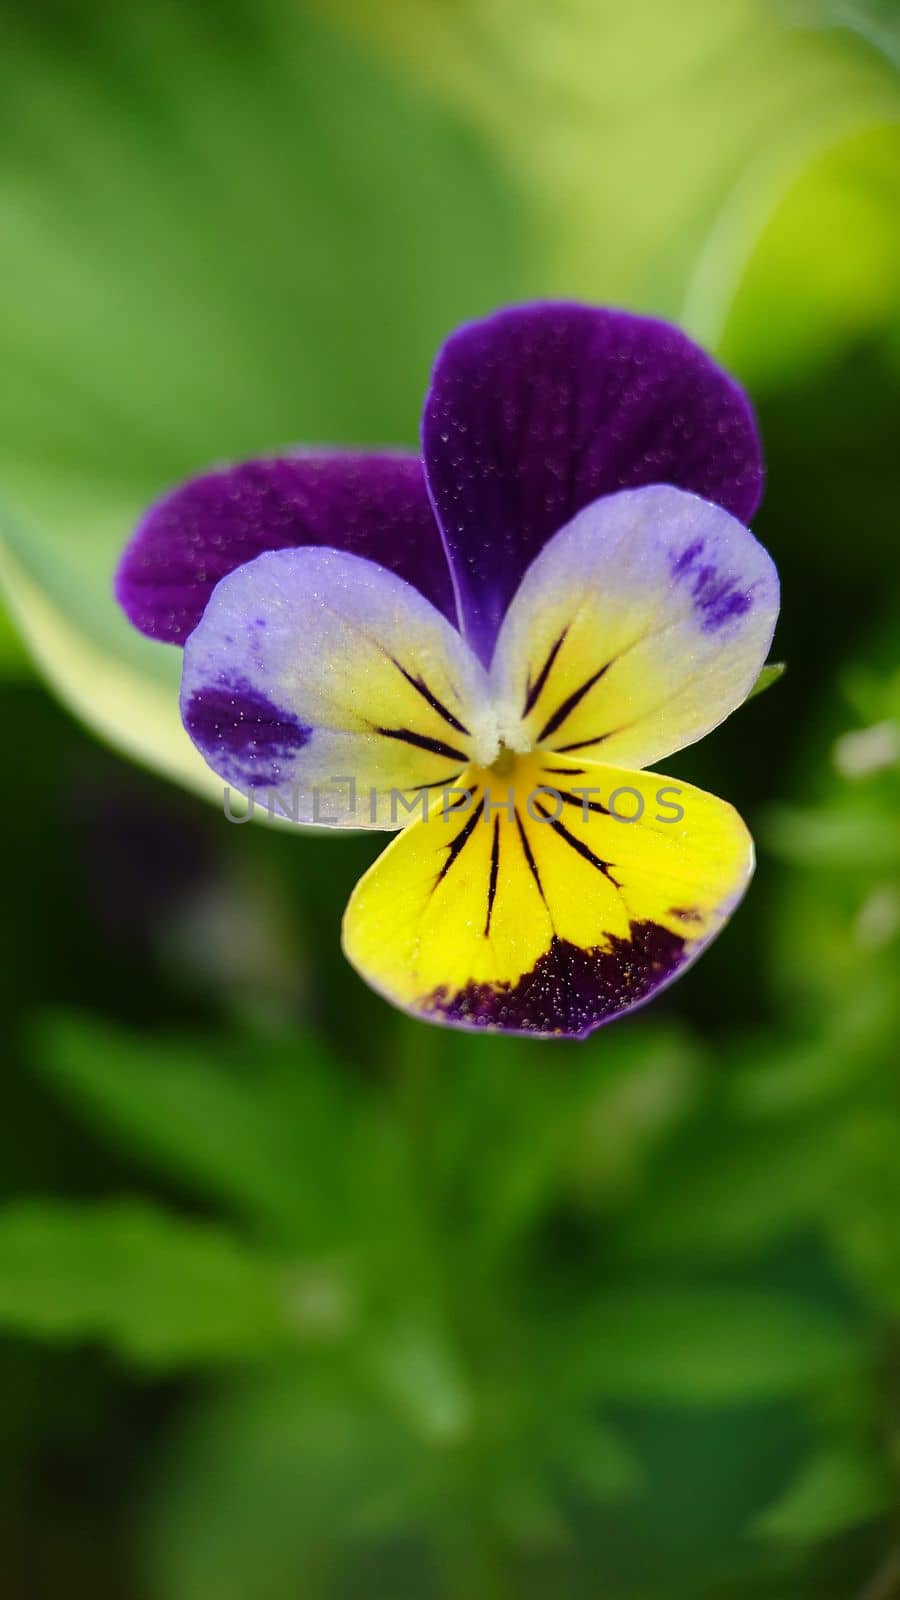 Background image of a tricolor flower pansies outdoors close-up by Mastak80